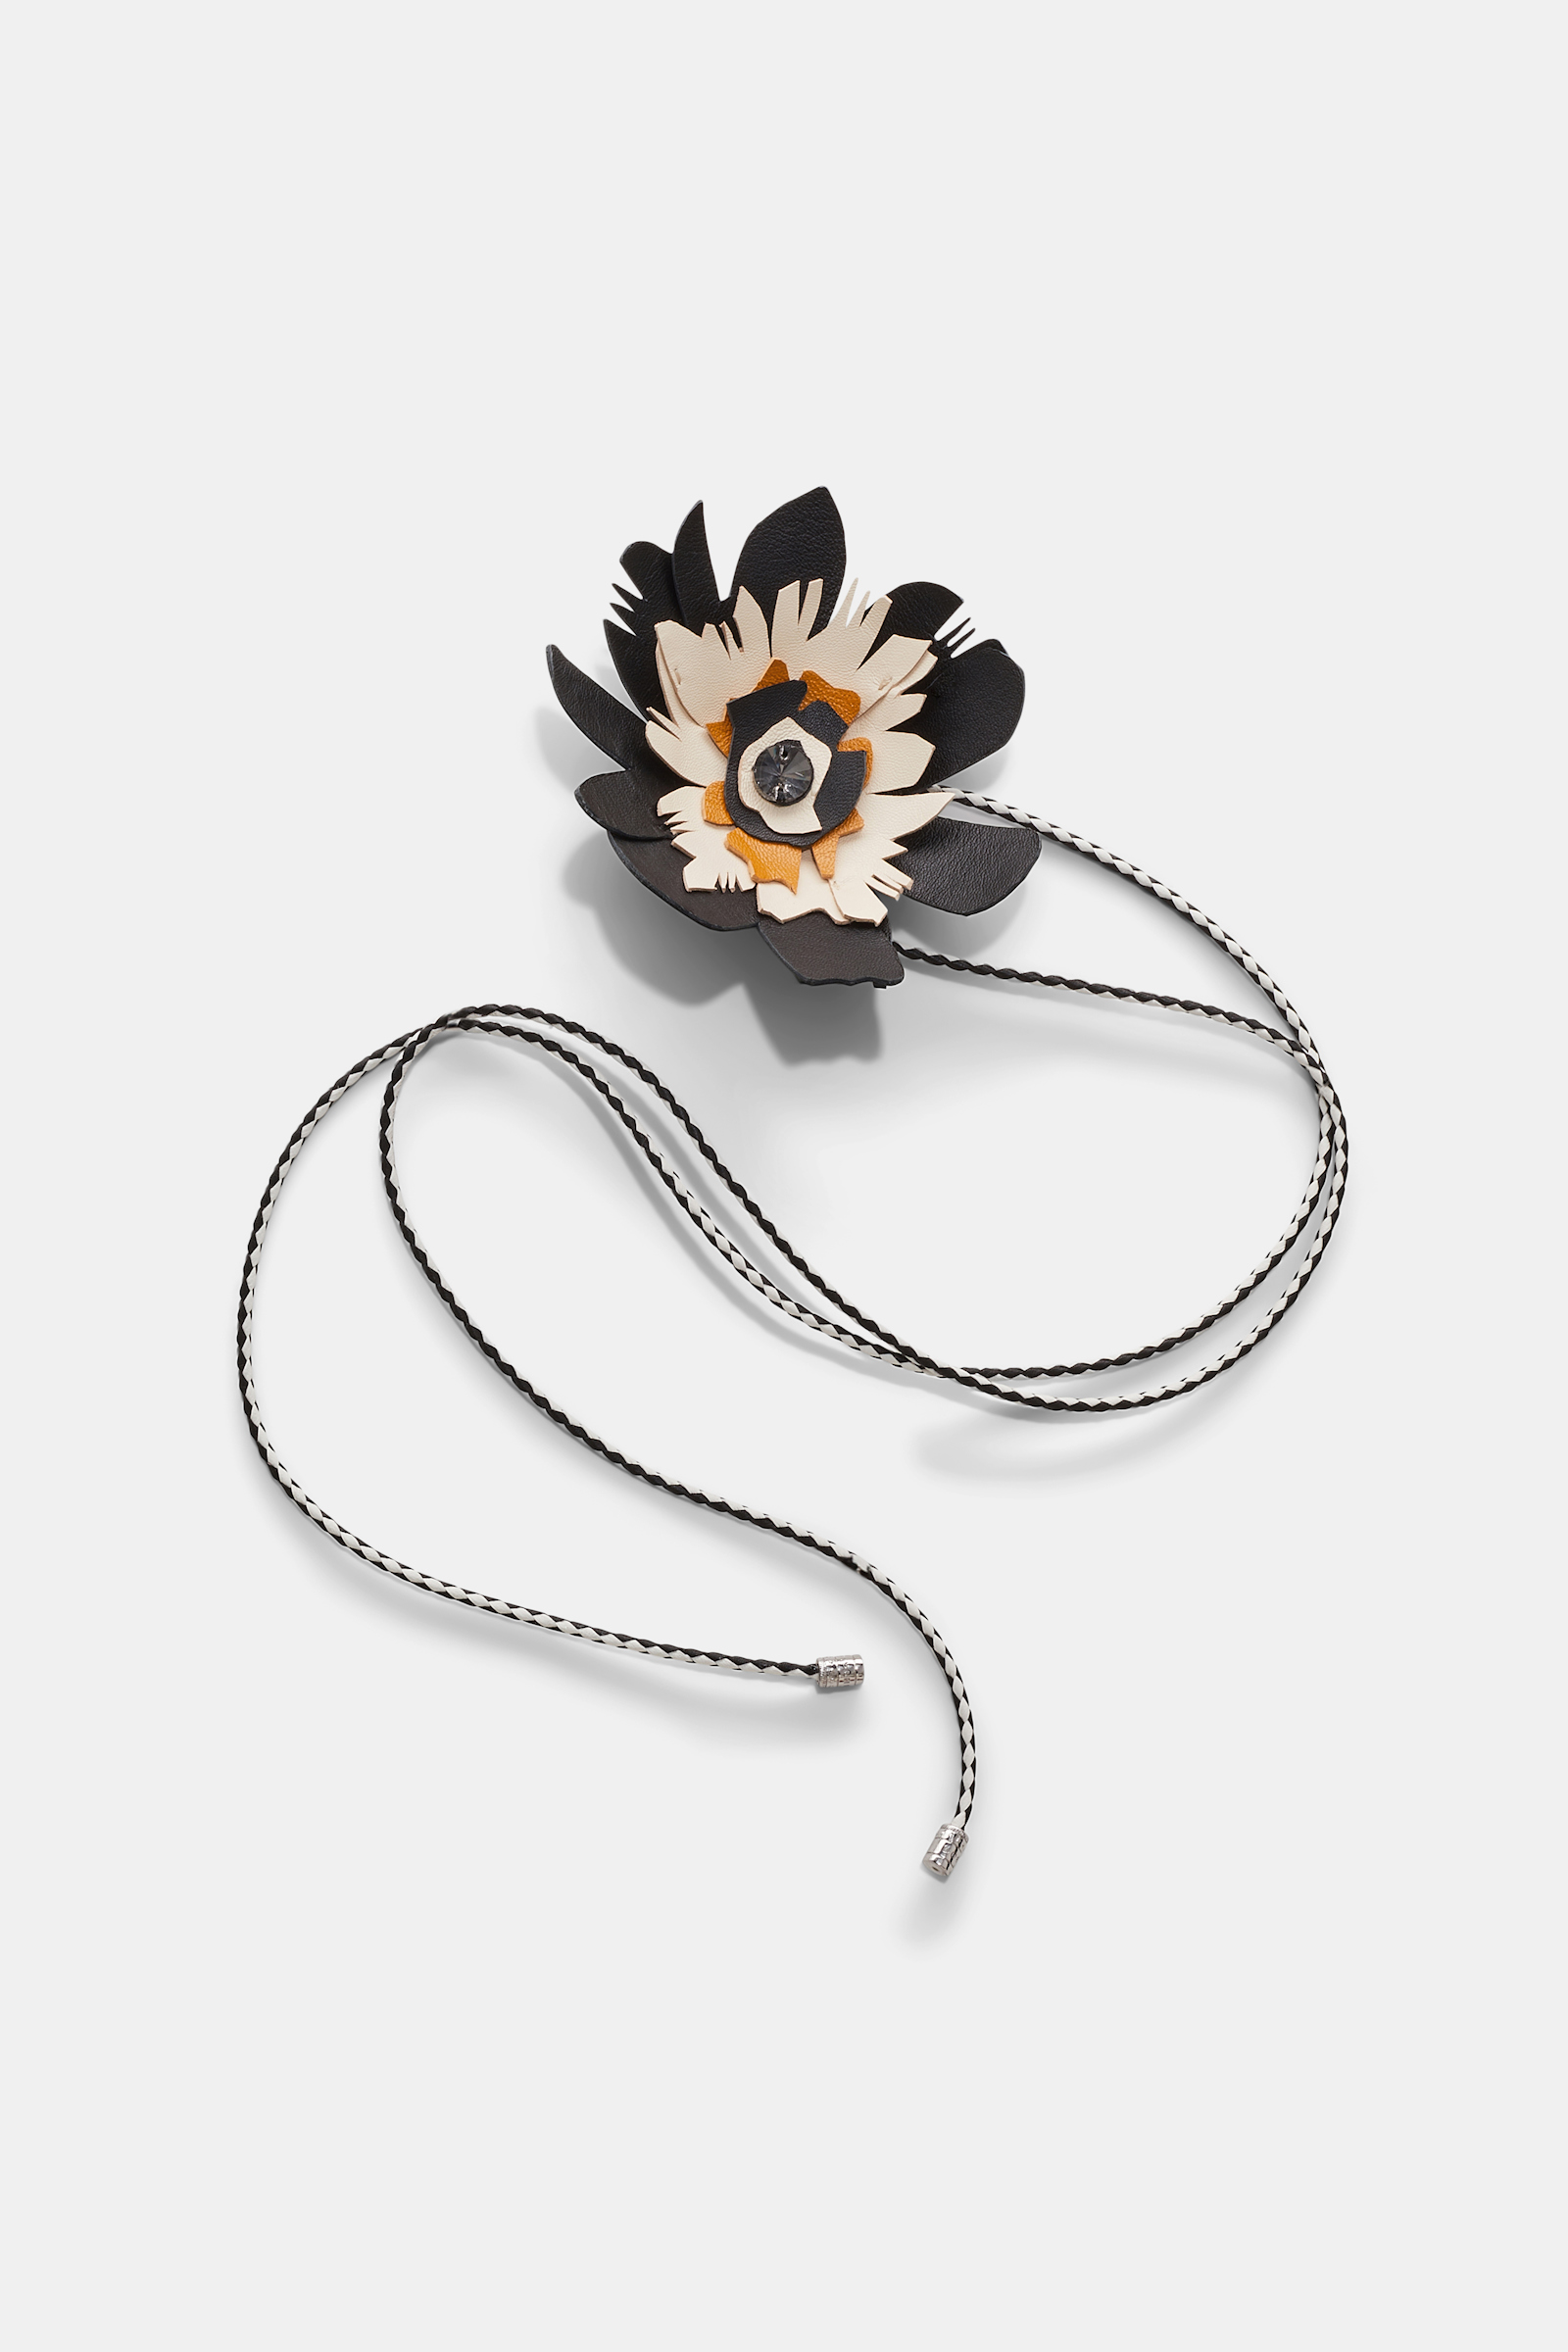 Dorothee Schumacher Woven leather choker wrap with small leather flower black & white